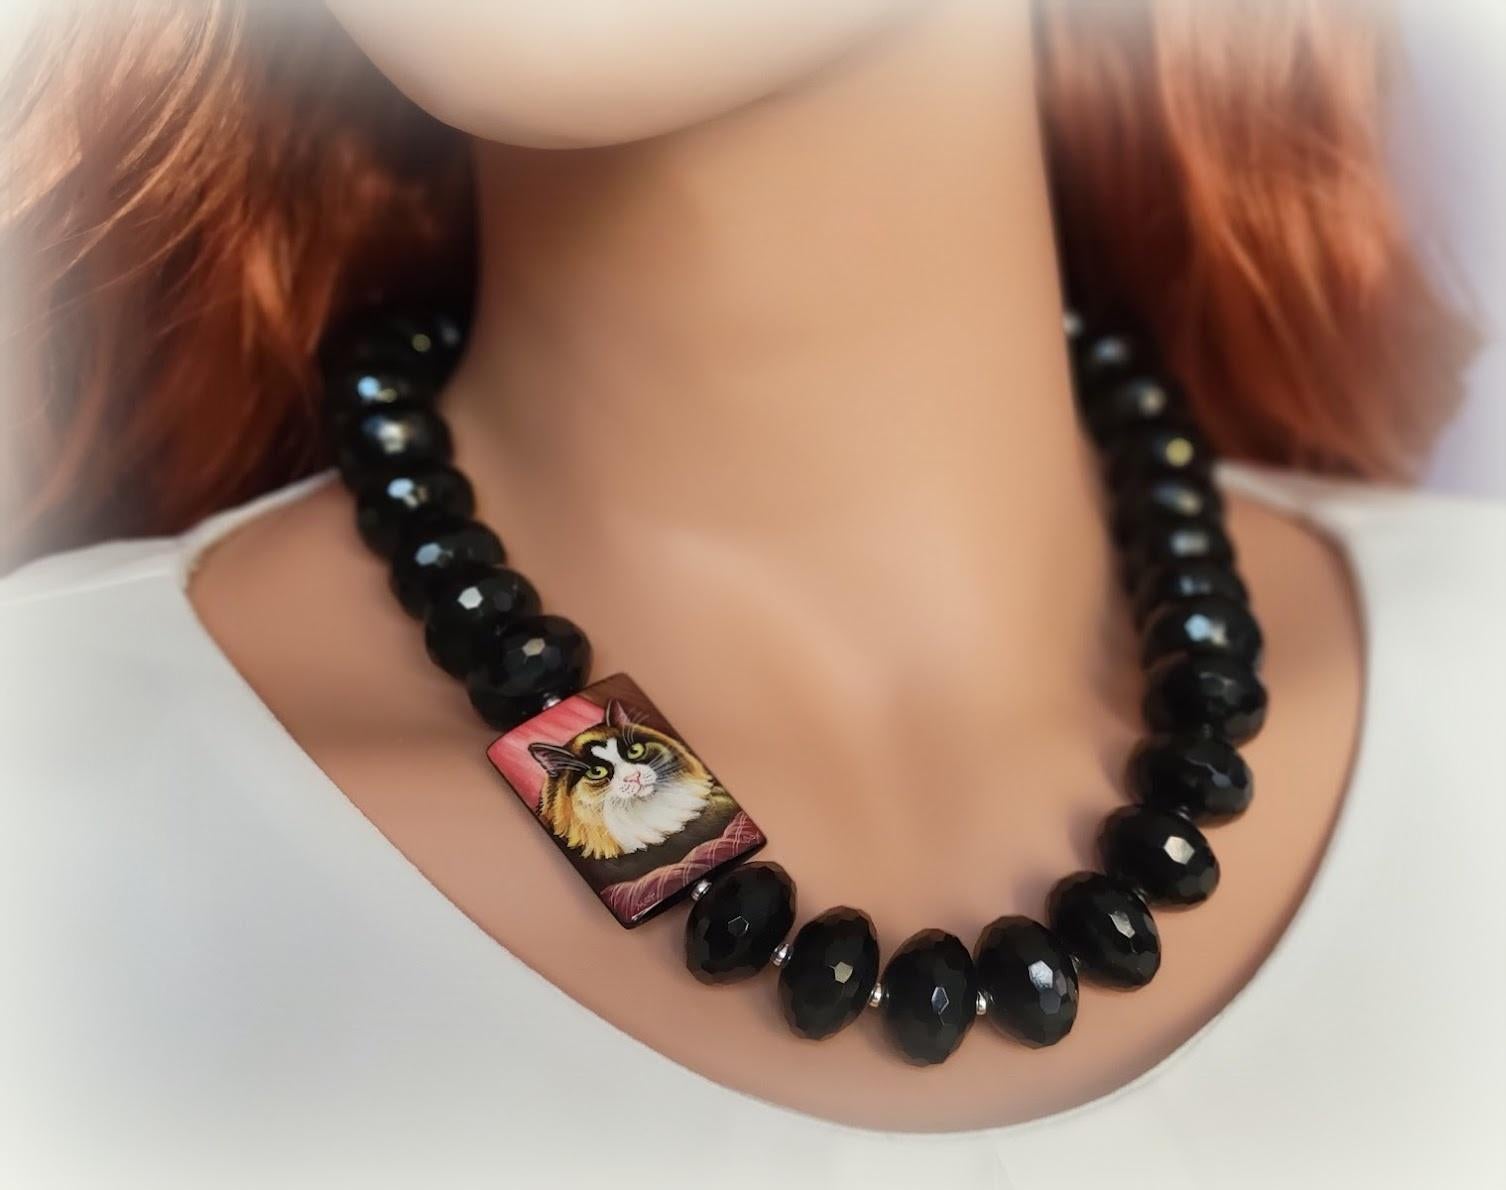 Black Onyx Necklace With Hand Painted Bead On Black Rectangular Agate For Sale 1